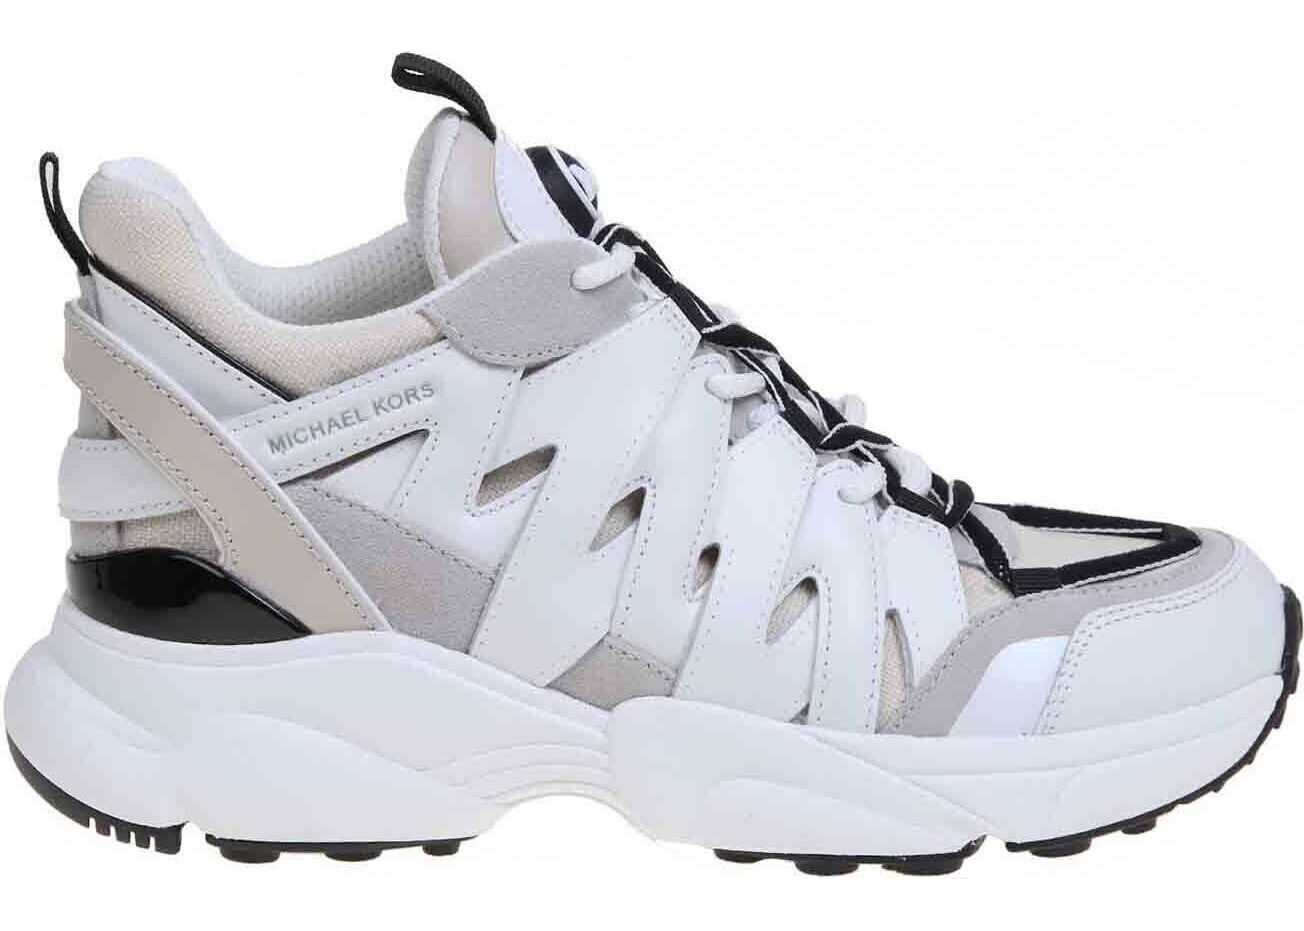 Michael Kors Hero Sneakers In White And Beige* White